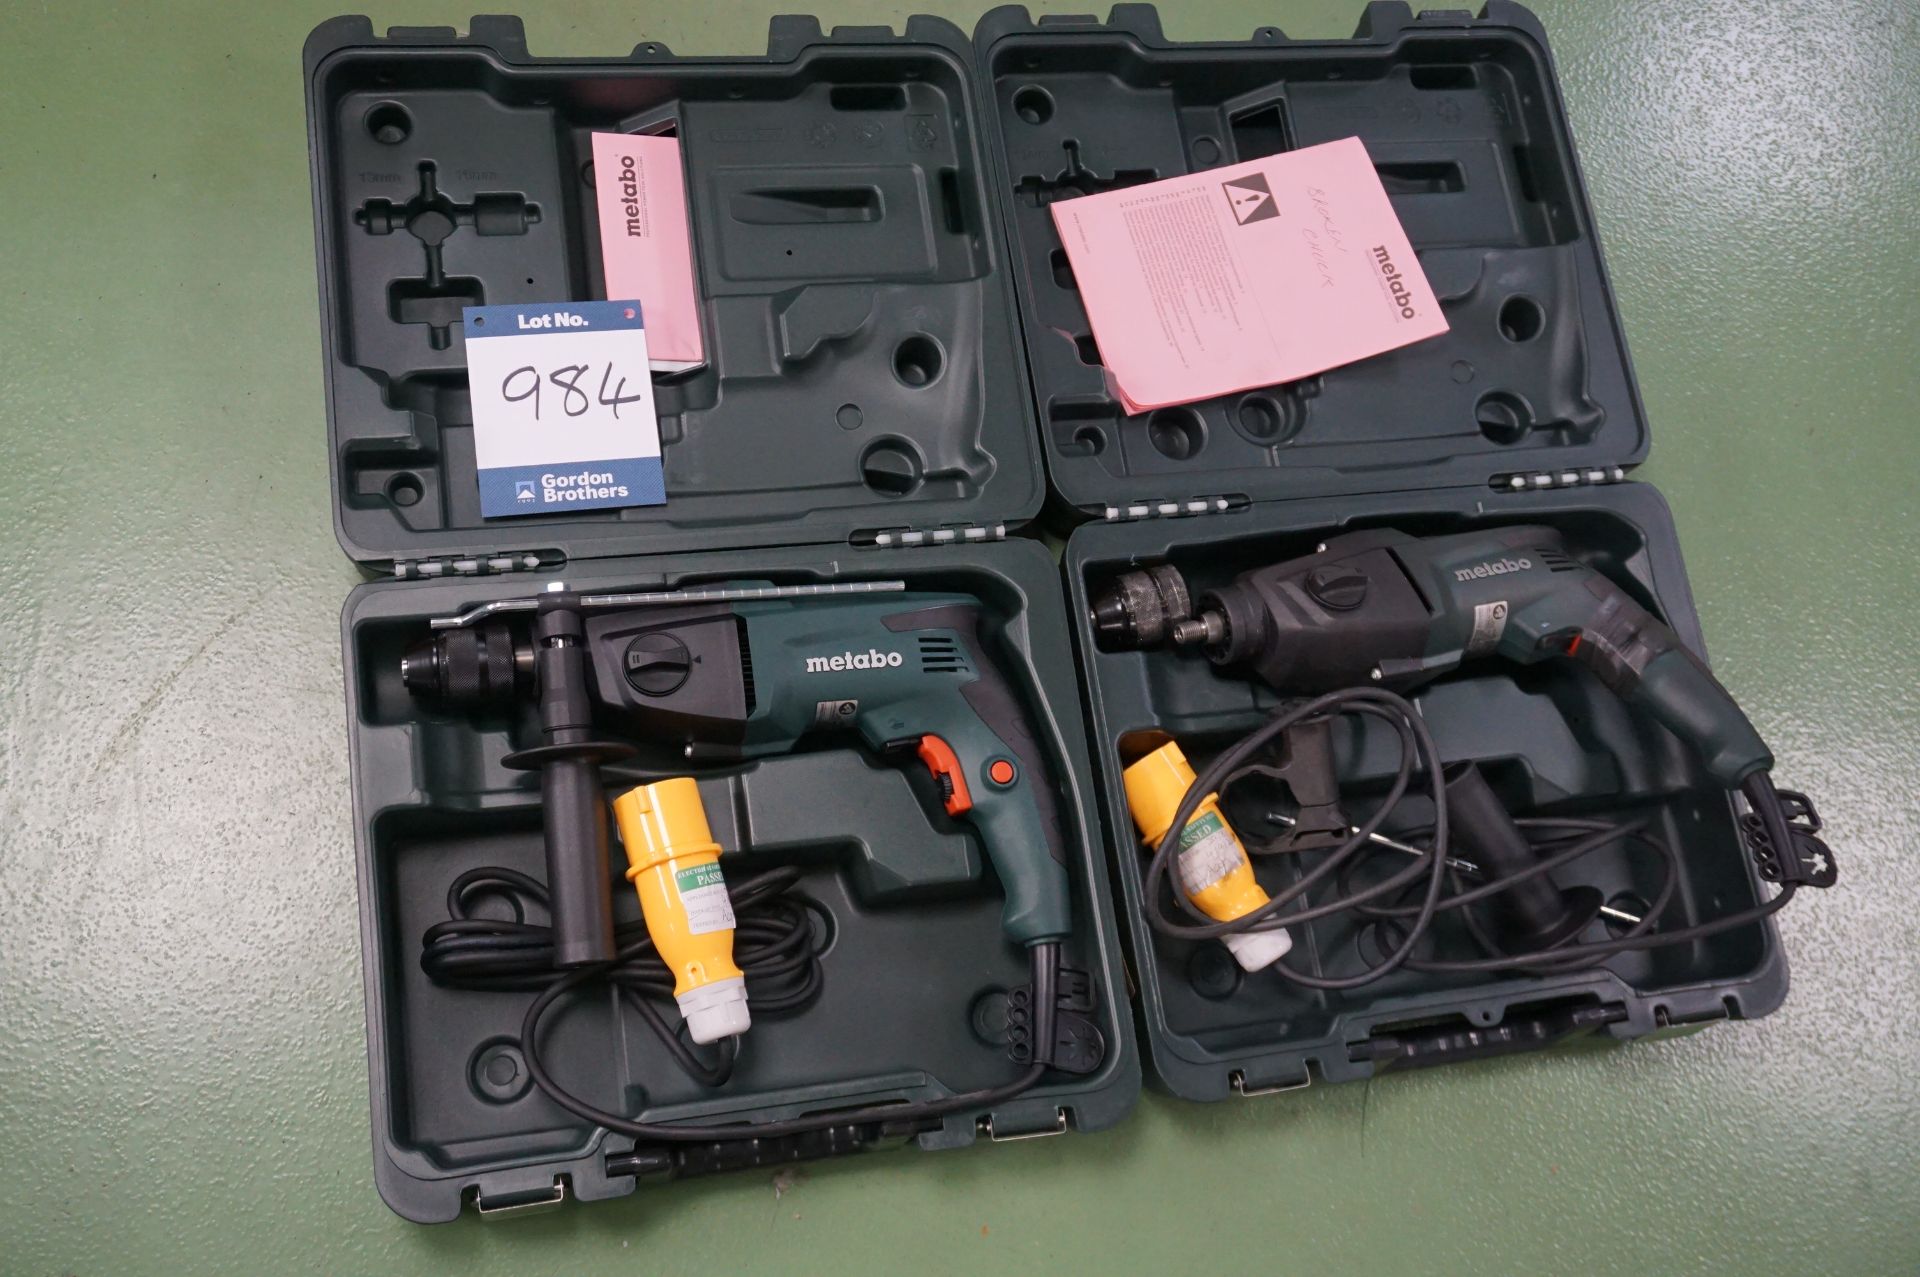 2 x Metabo SBE 760 110v hammer drills with carry cases